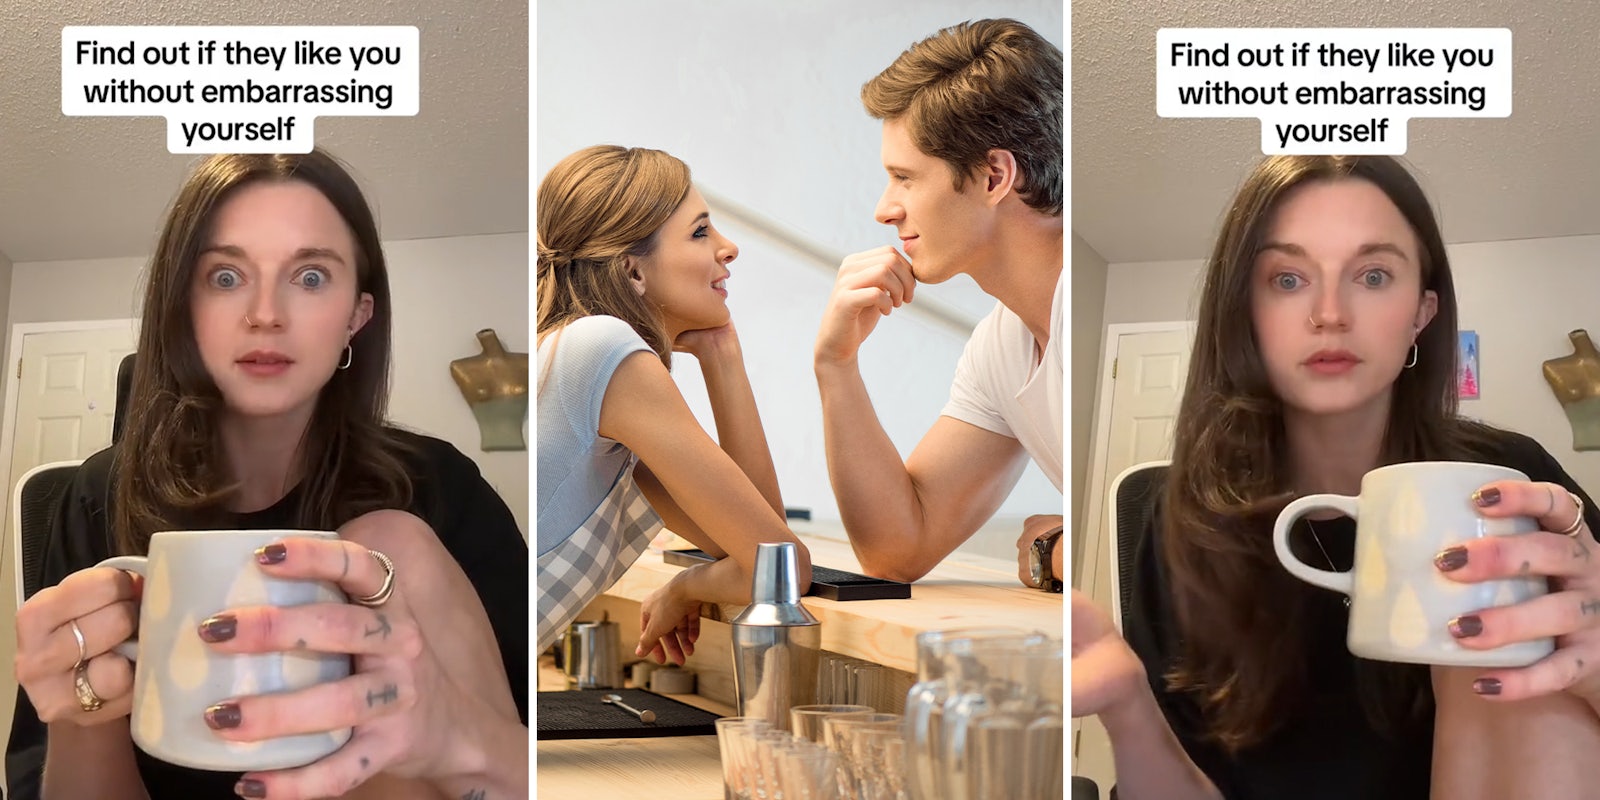 Dating expert reveals her tips to tell if they like you